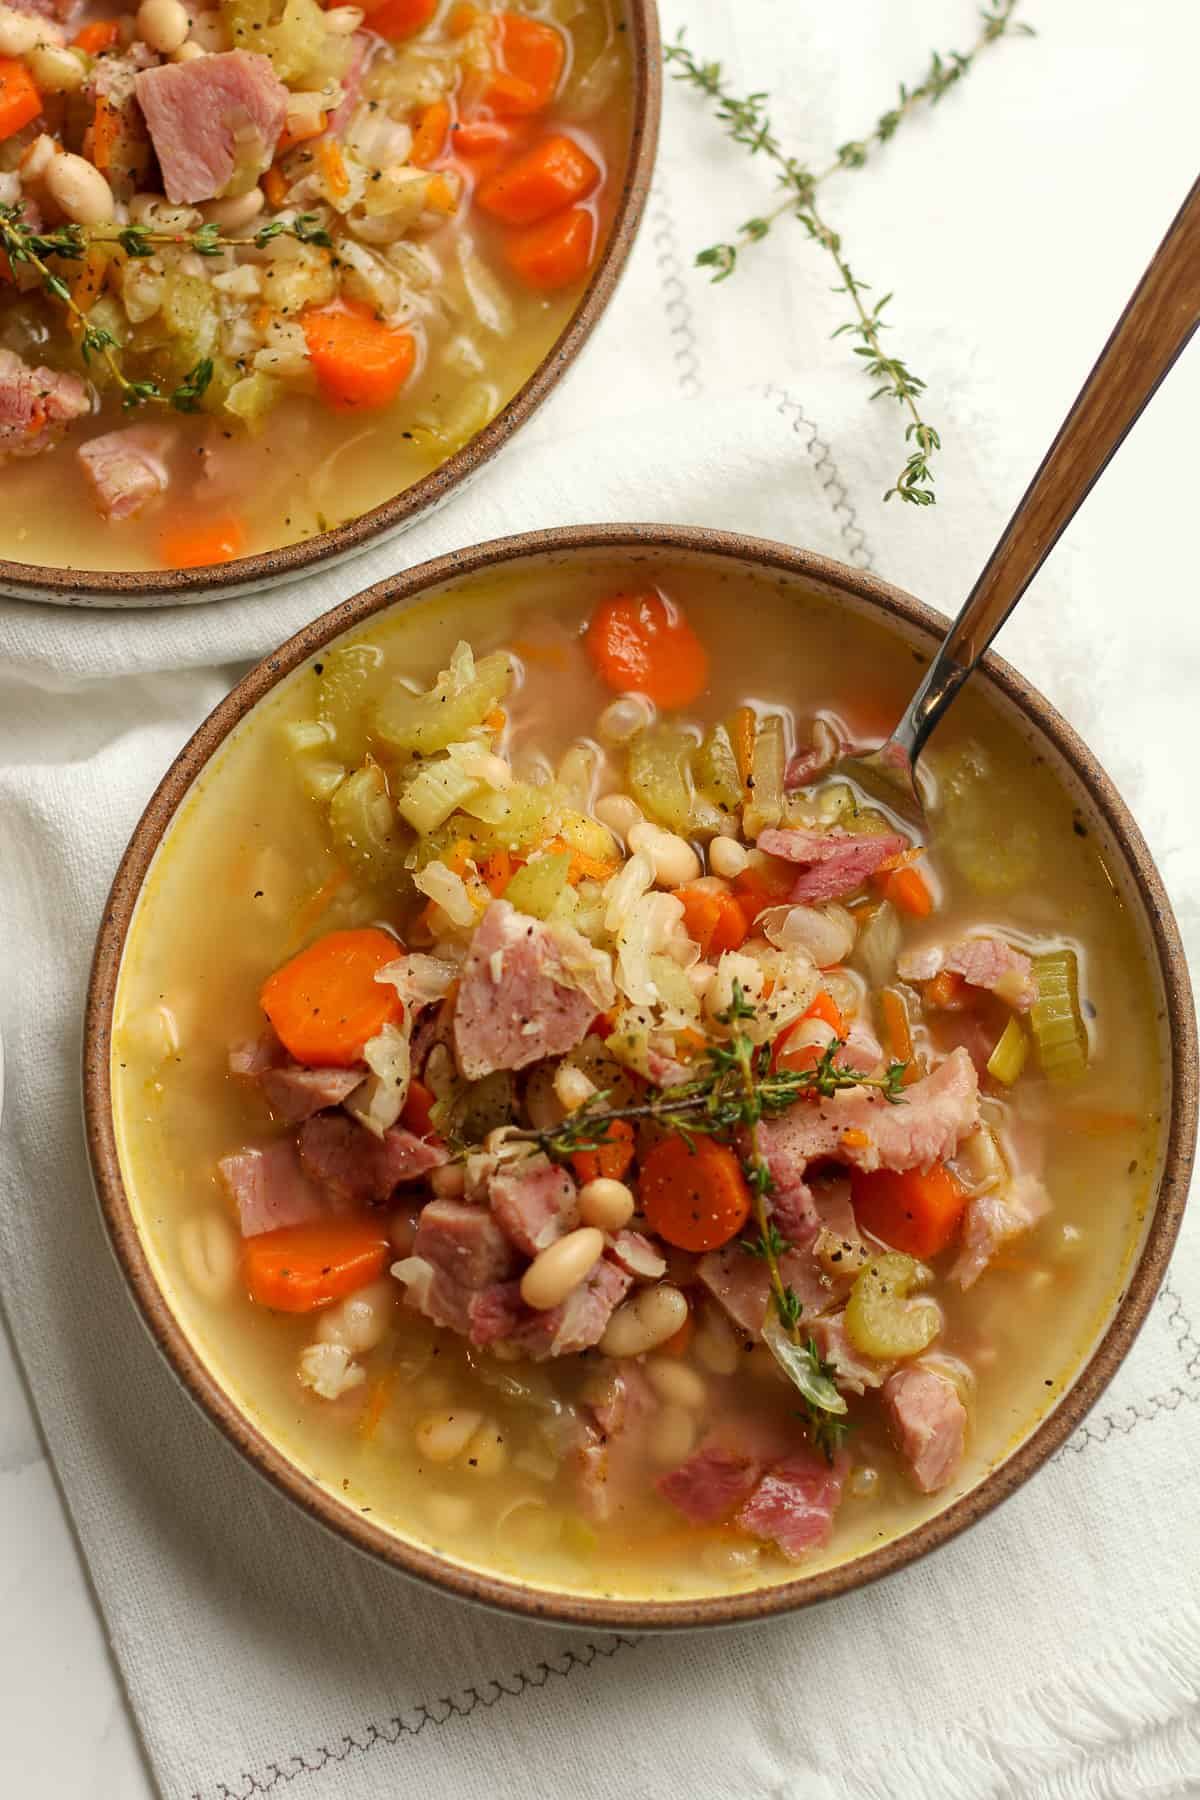 Bowls of leftover ham and white bean soup, with spoons.